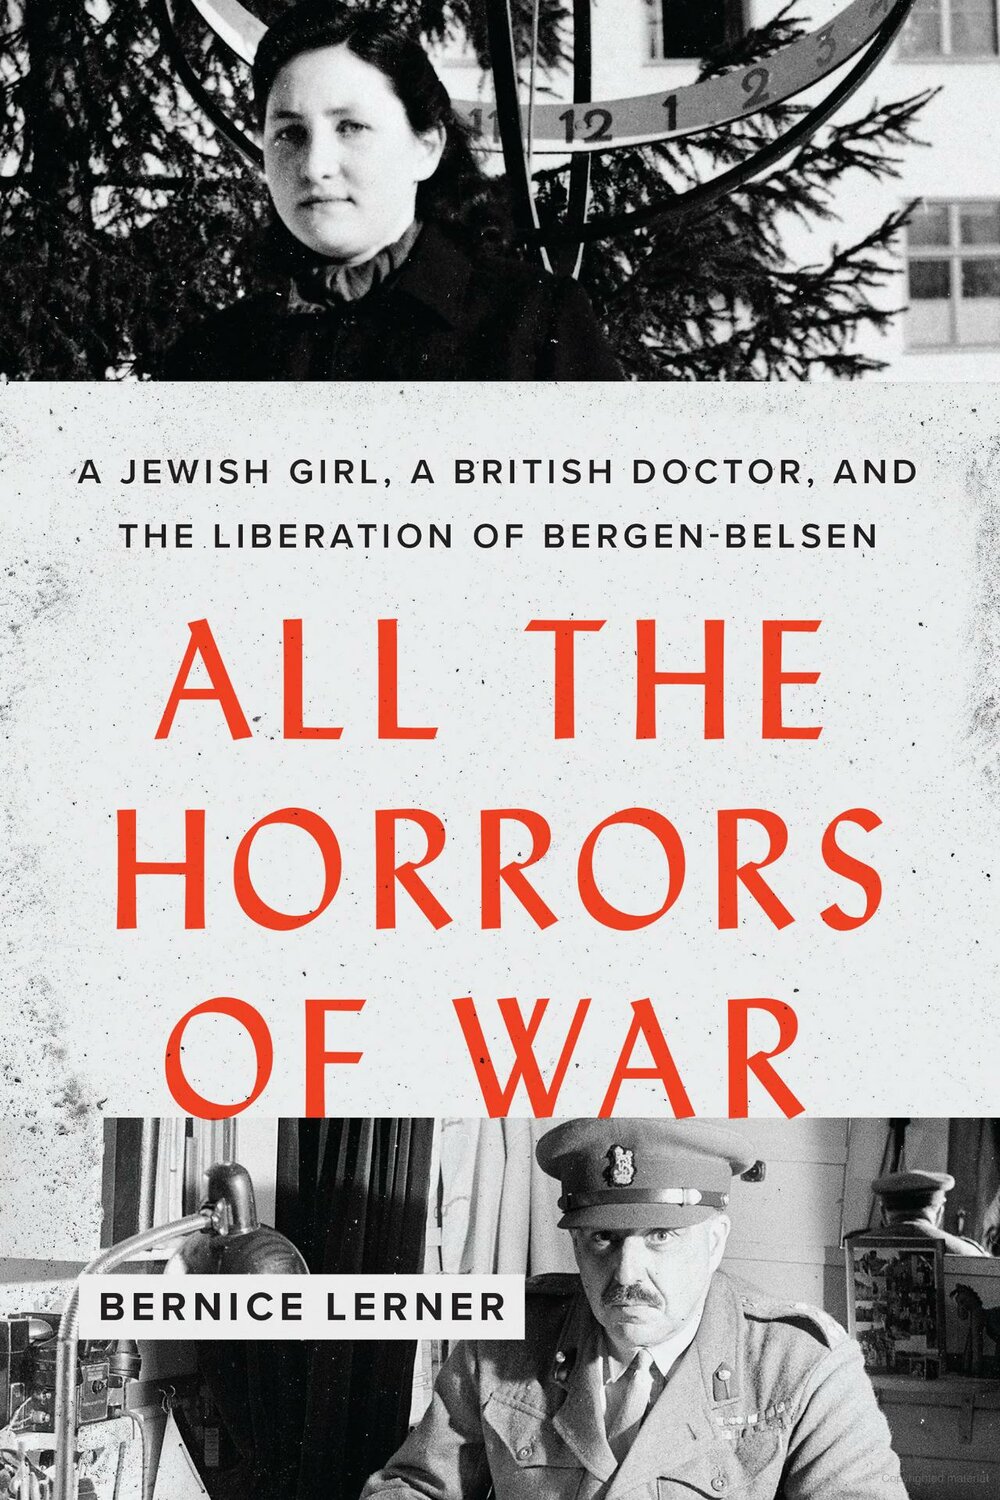 Dr. Bernice Lerner, author of “All the Horrors of War: A Jewish Girl, a British Doctor and the Liberation of Bergen-Belsen."